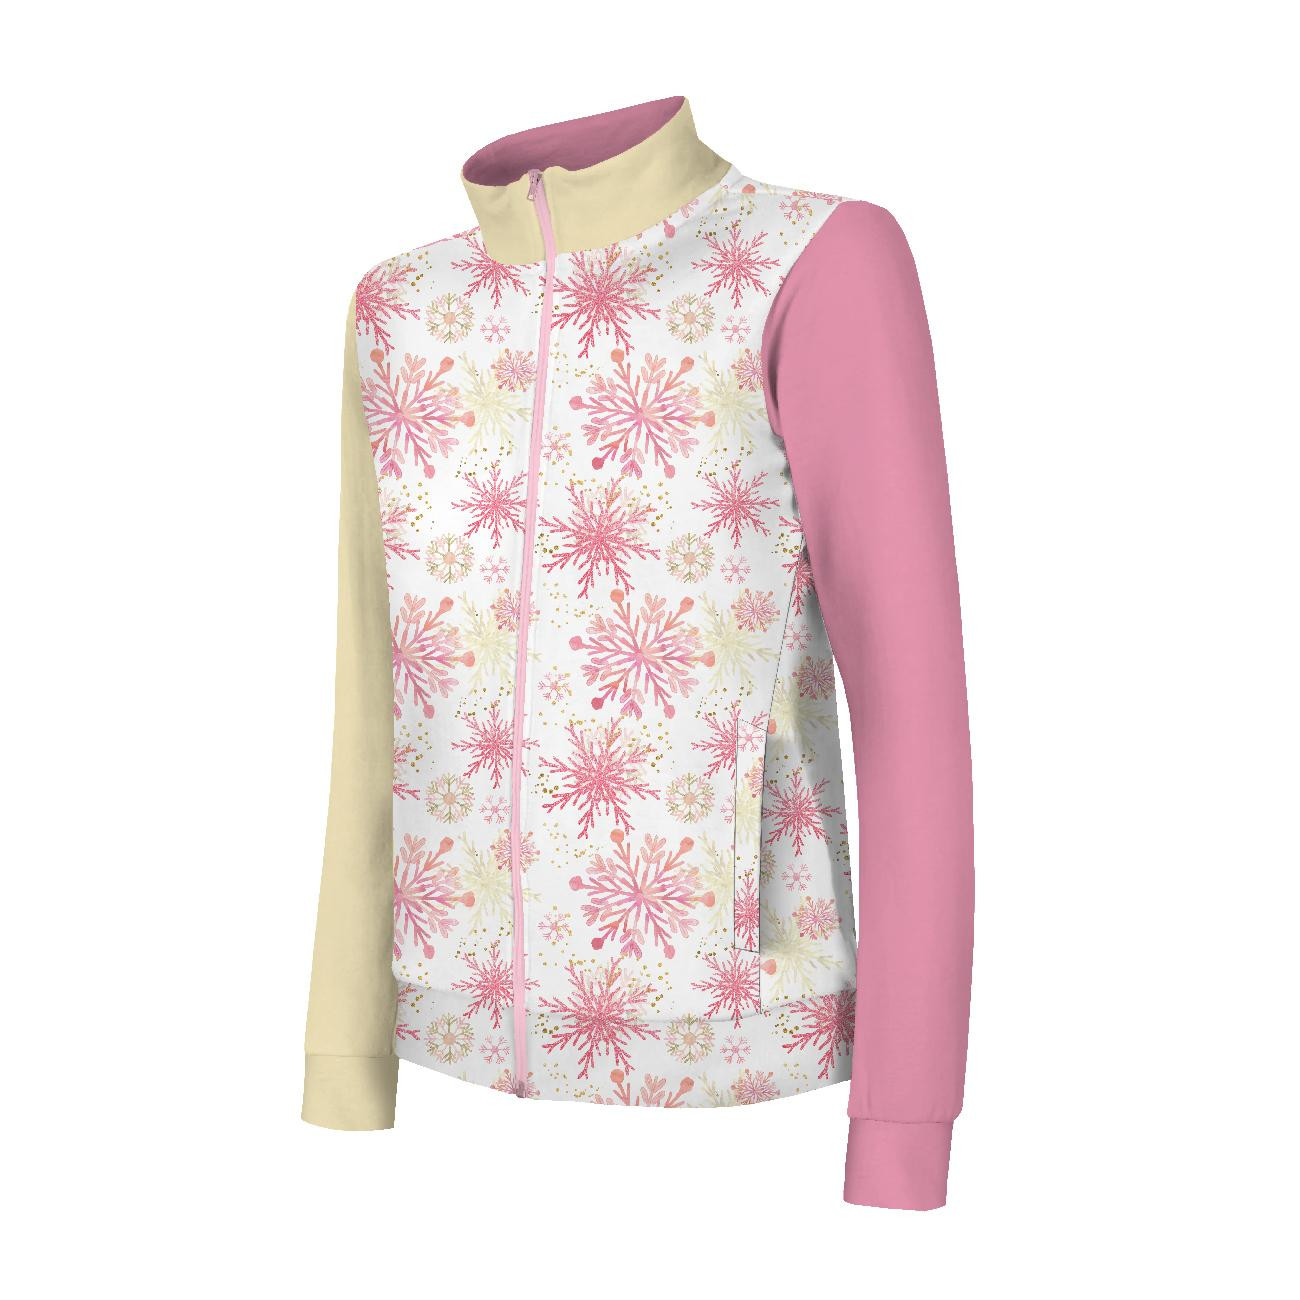 "MAX" CHILDREN'S TRAINING JACKET - PINK SNOWFLAKES - knit with short nap